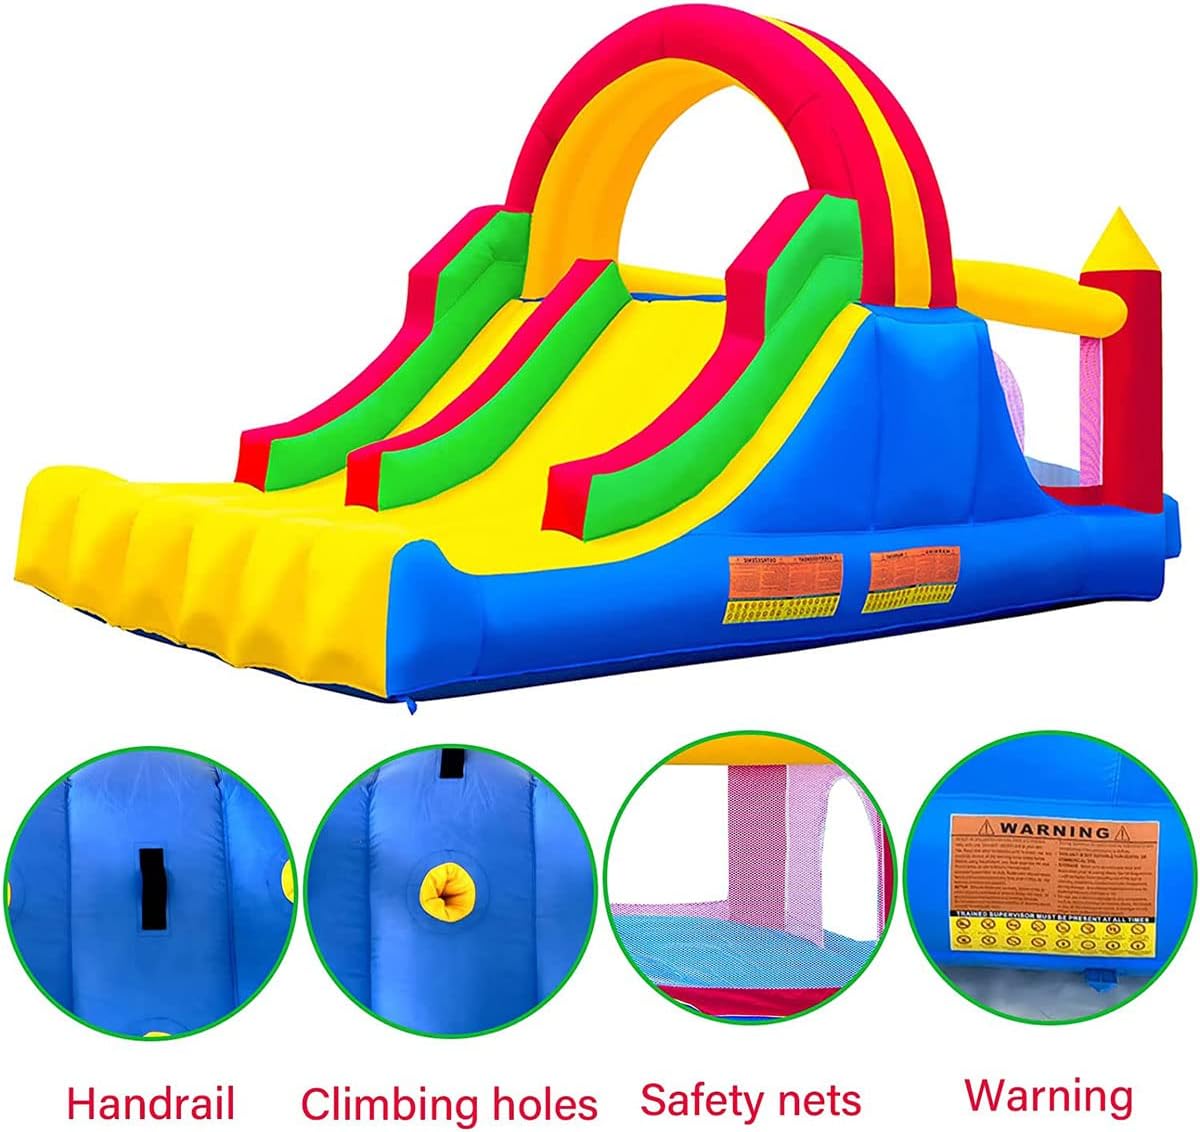 Ballsea Inflatable Bounce House Large Bouncy Castles Dual Slide Trampoline Climbing Wall with Blower for Kids Age 3-10, 4.88 x 2.23 x 2.2m